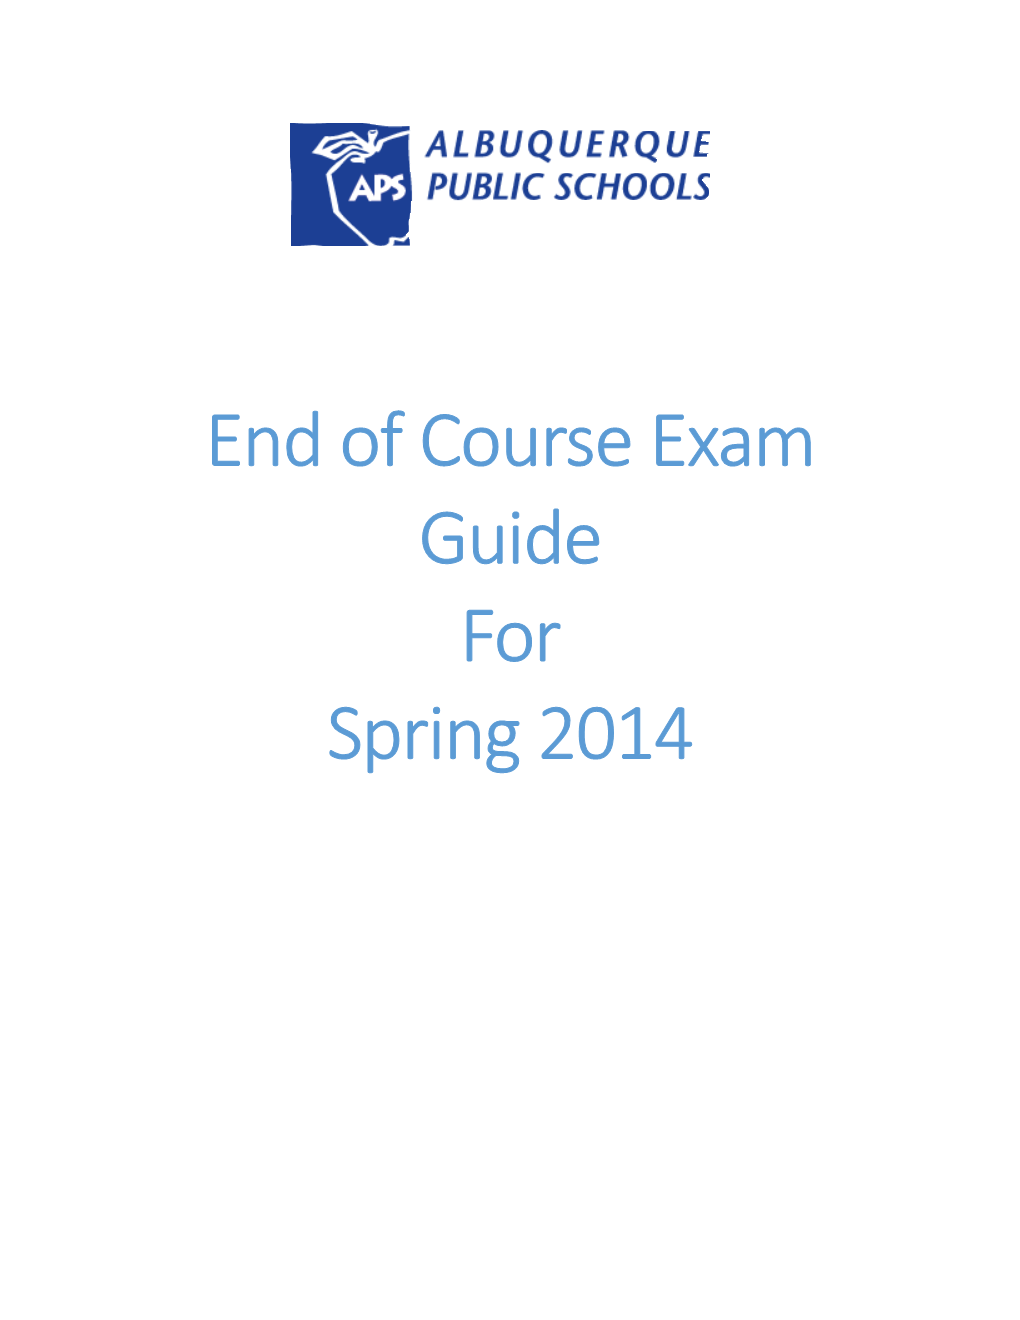 03/25/14 End of Course Exam Guide 1 Page